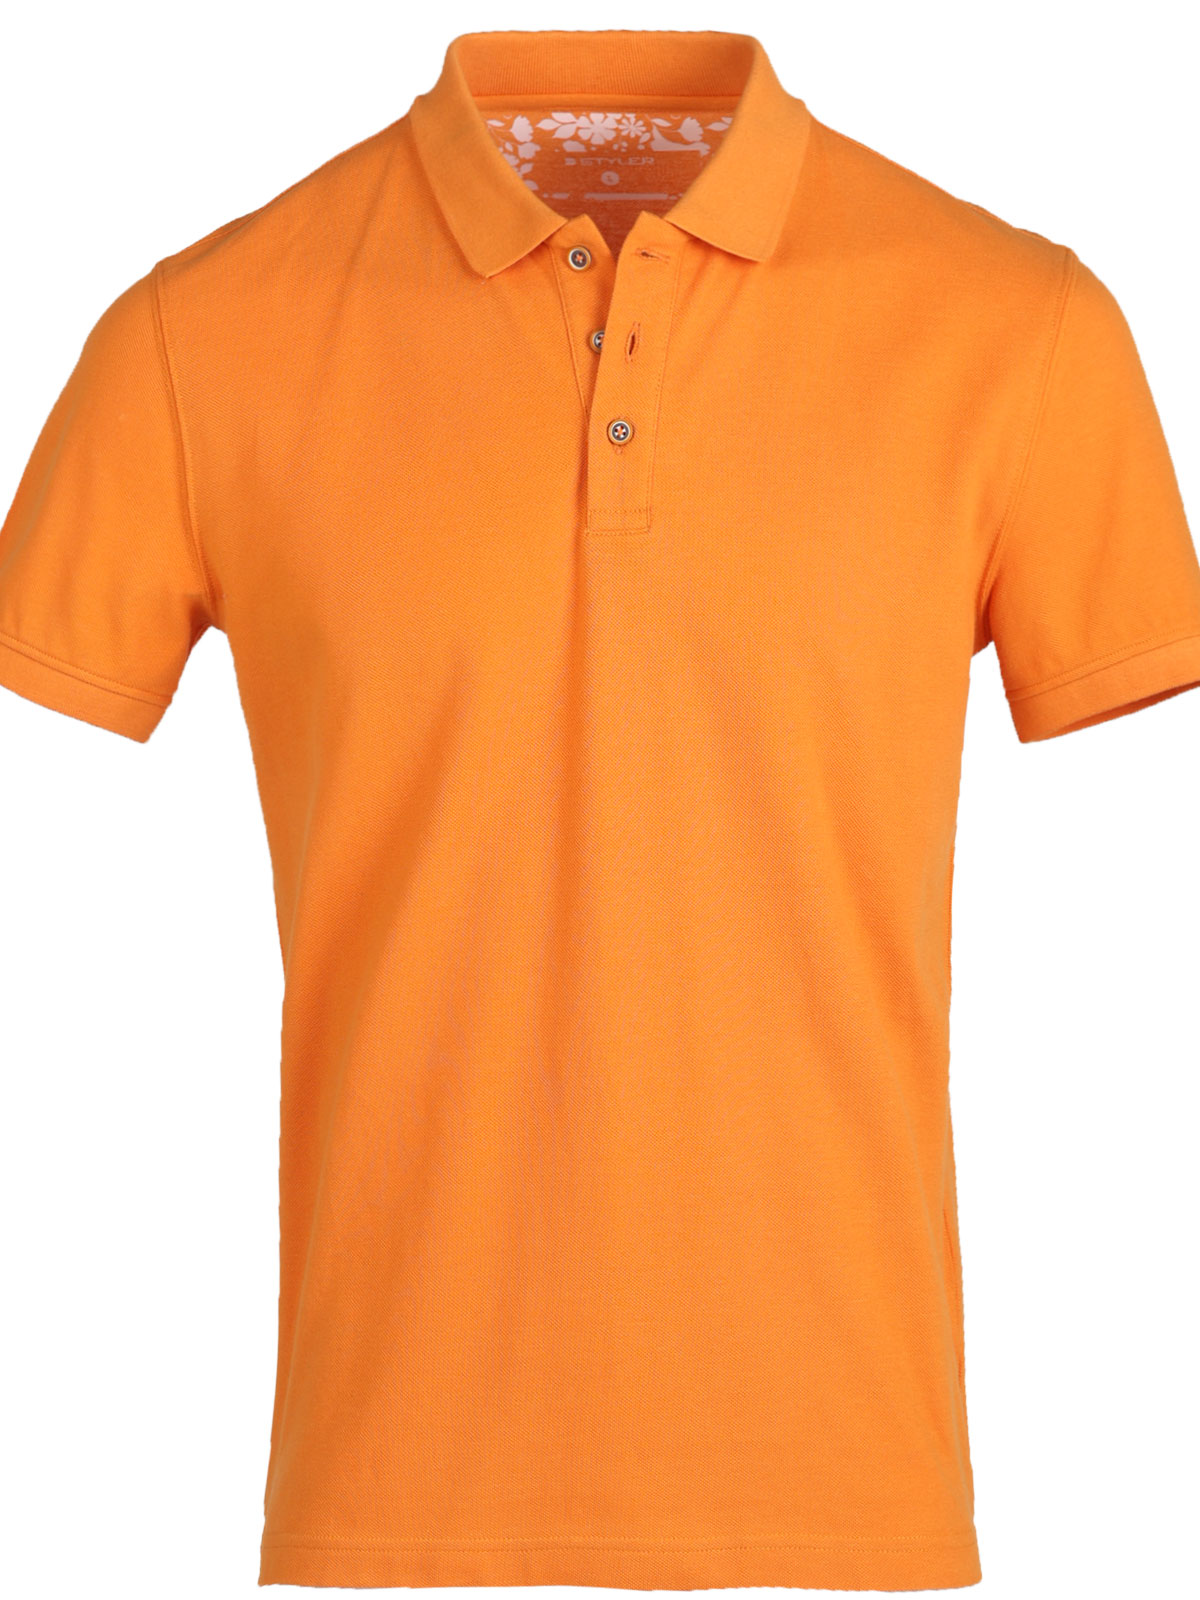 Tshirt in orange with a knitted collar - 93434 € 37.12 img3